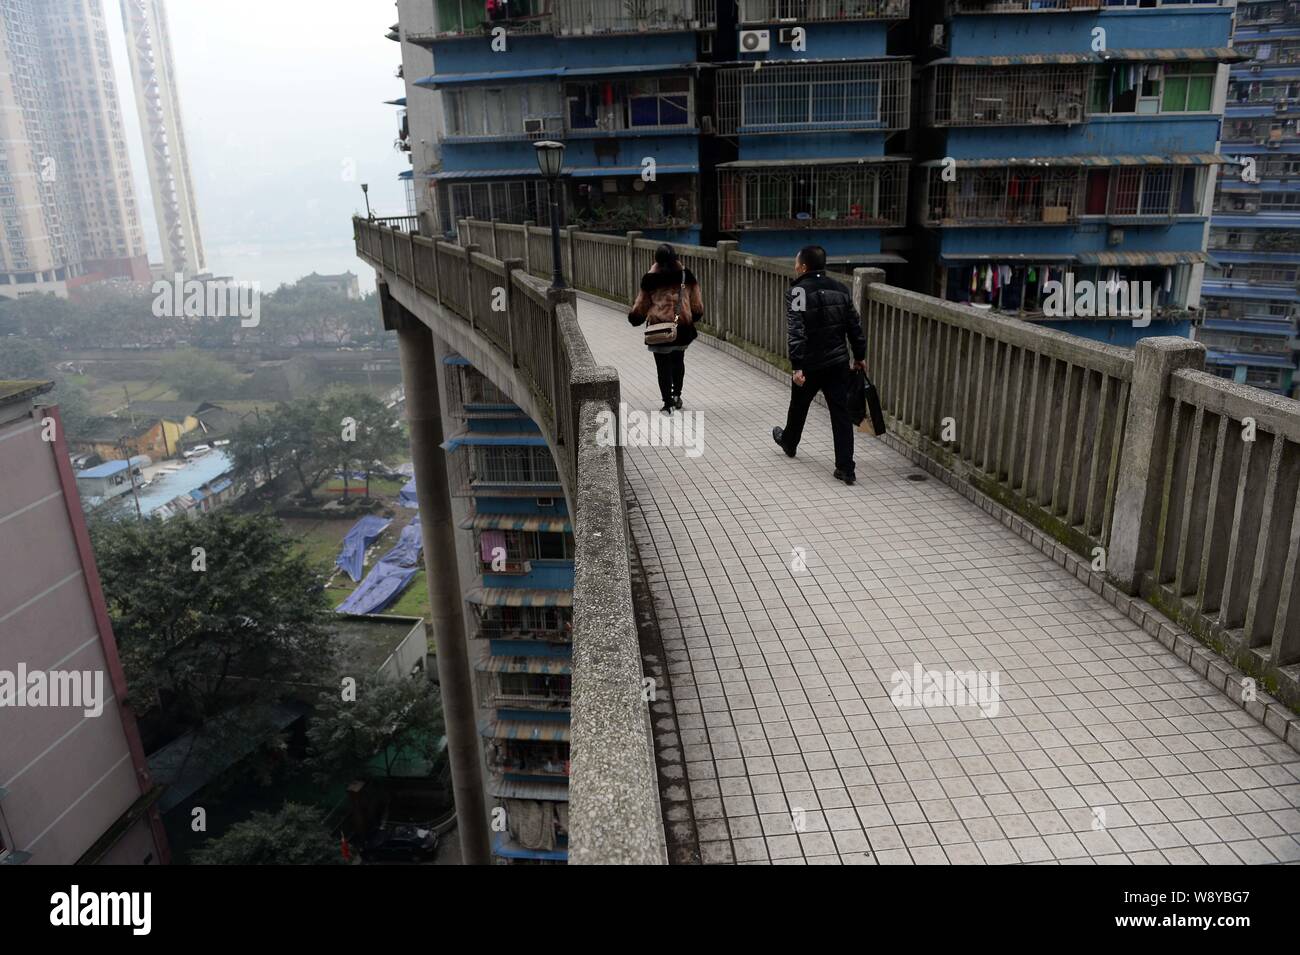 Local Chinese residents walk on the pedestrian bridge linking the 13th floor of a building with the street below in Chongqing, China, 14 December 2014 Stock Photo